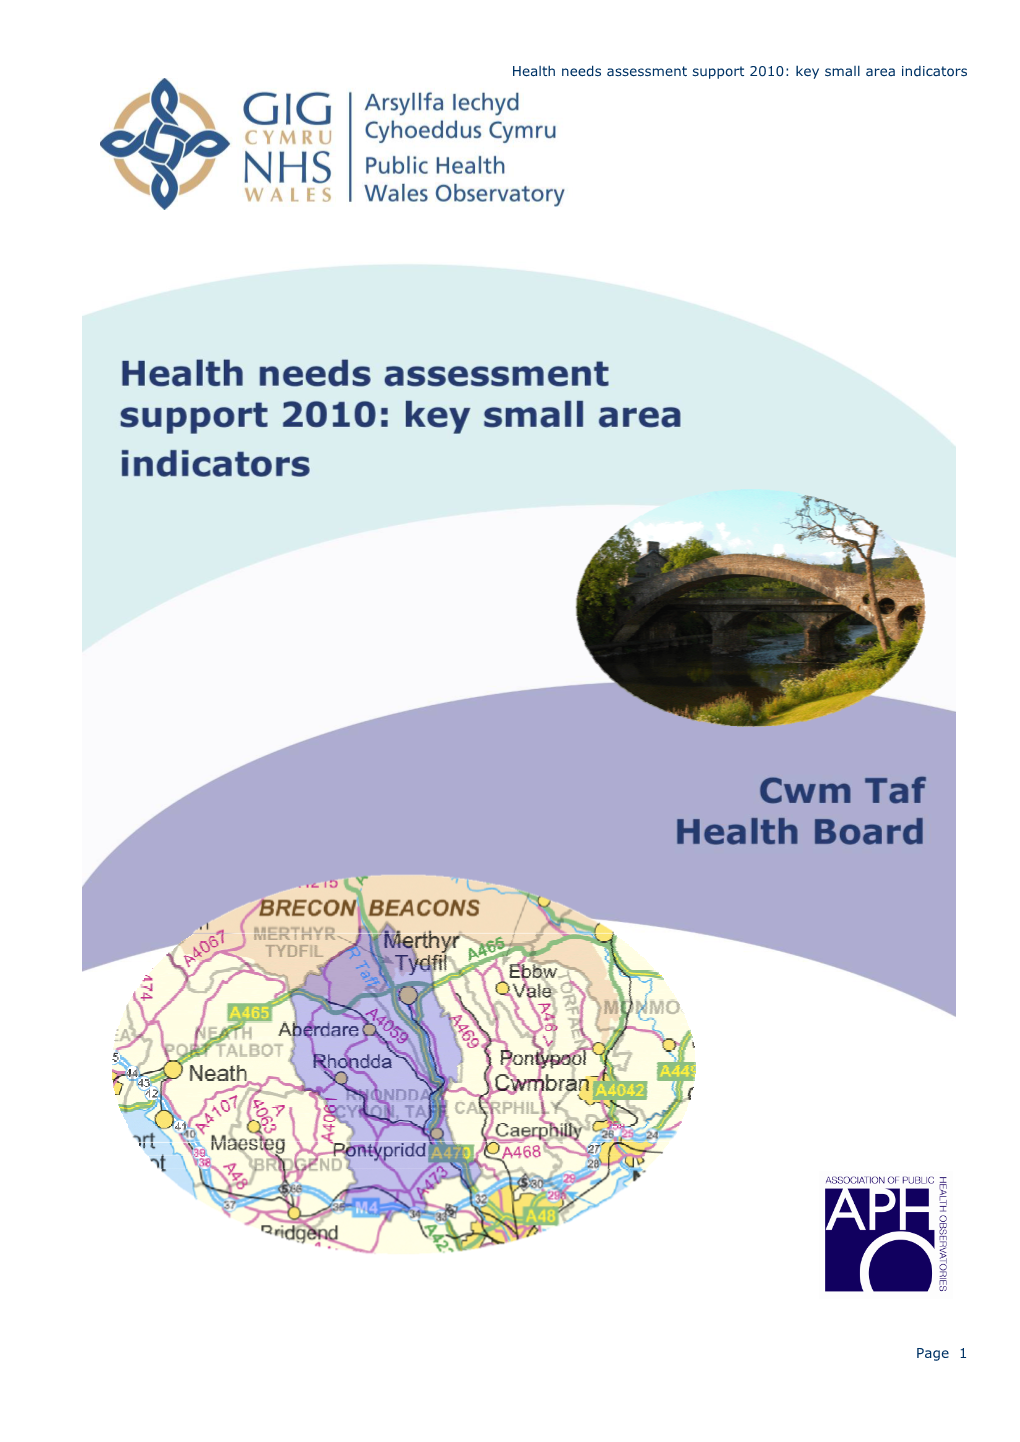 Health Needs Assessment Support 2010: Key Small Area Indicators